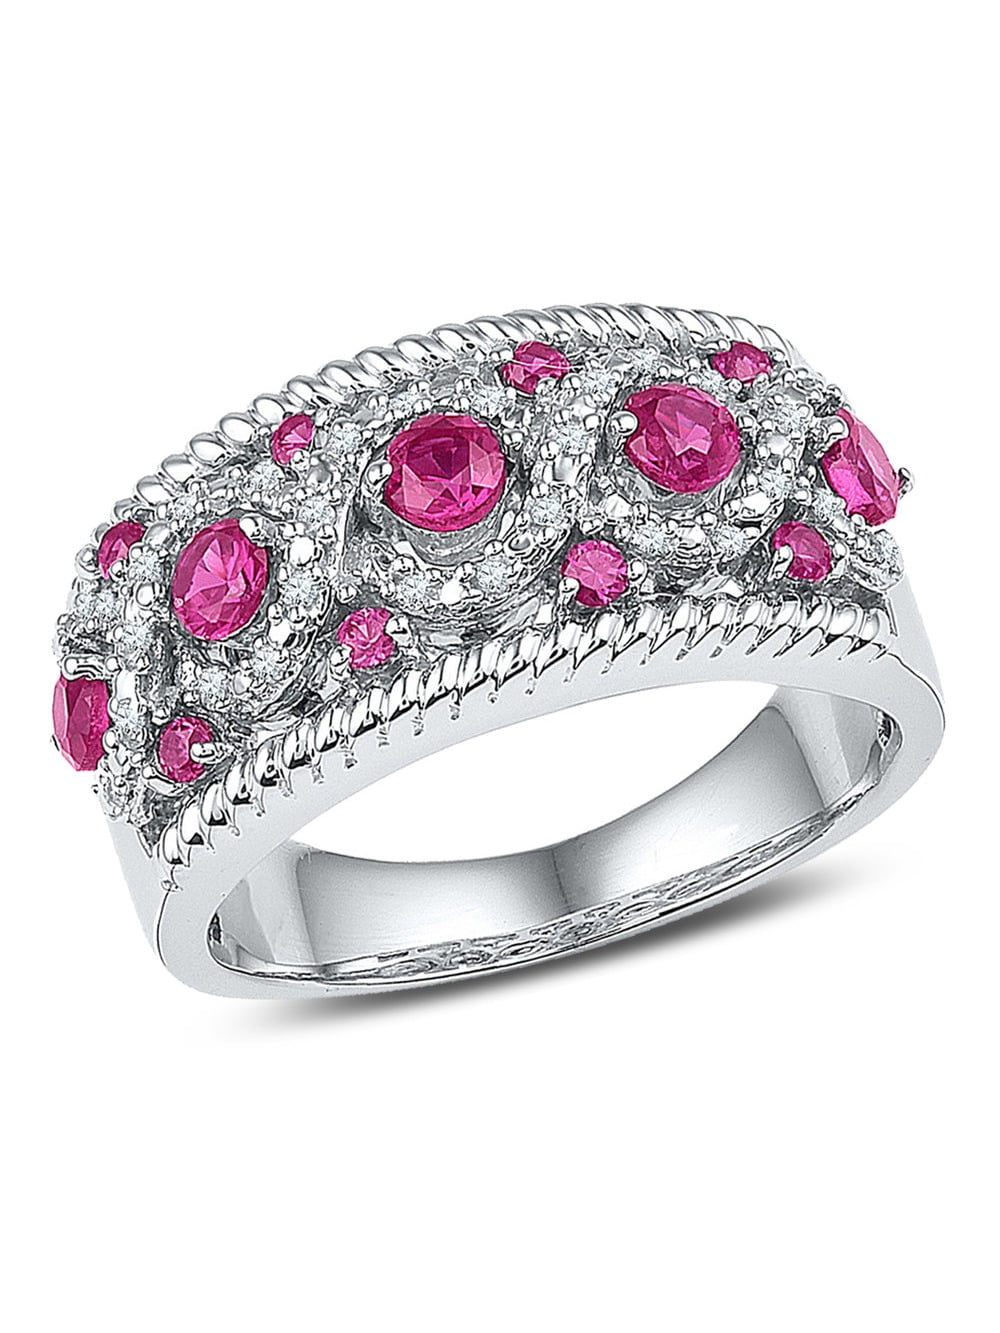 lab created pink sapphire ring